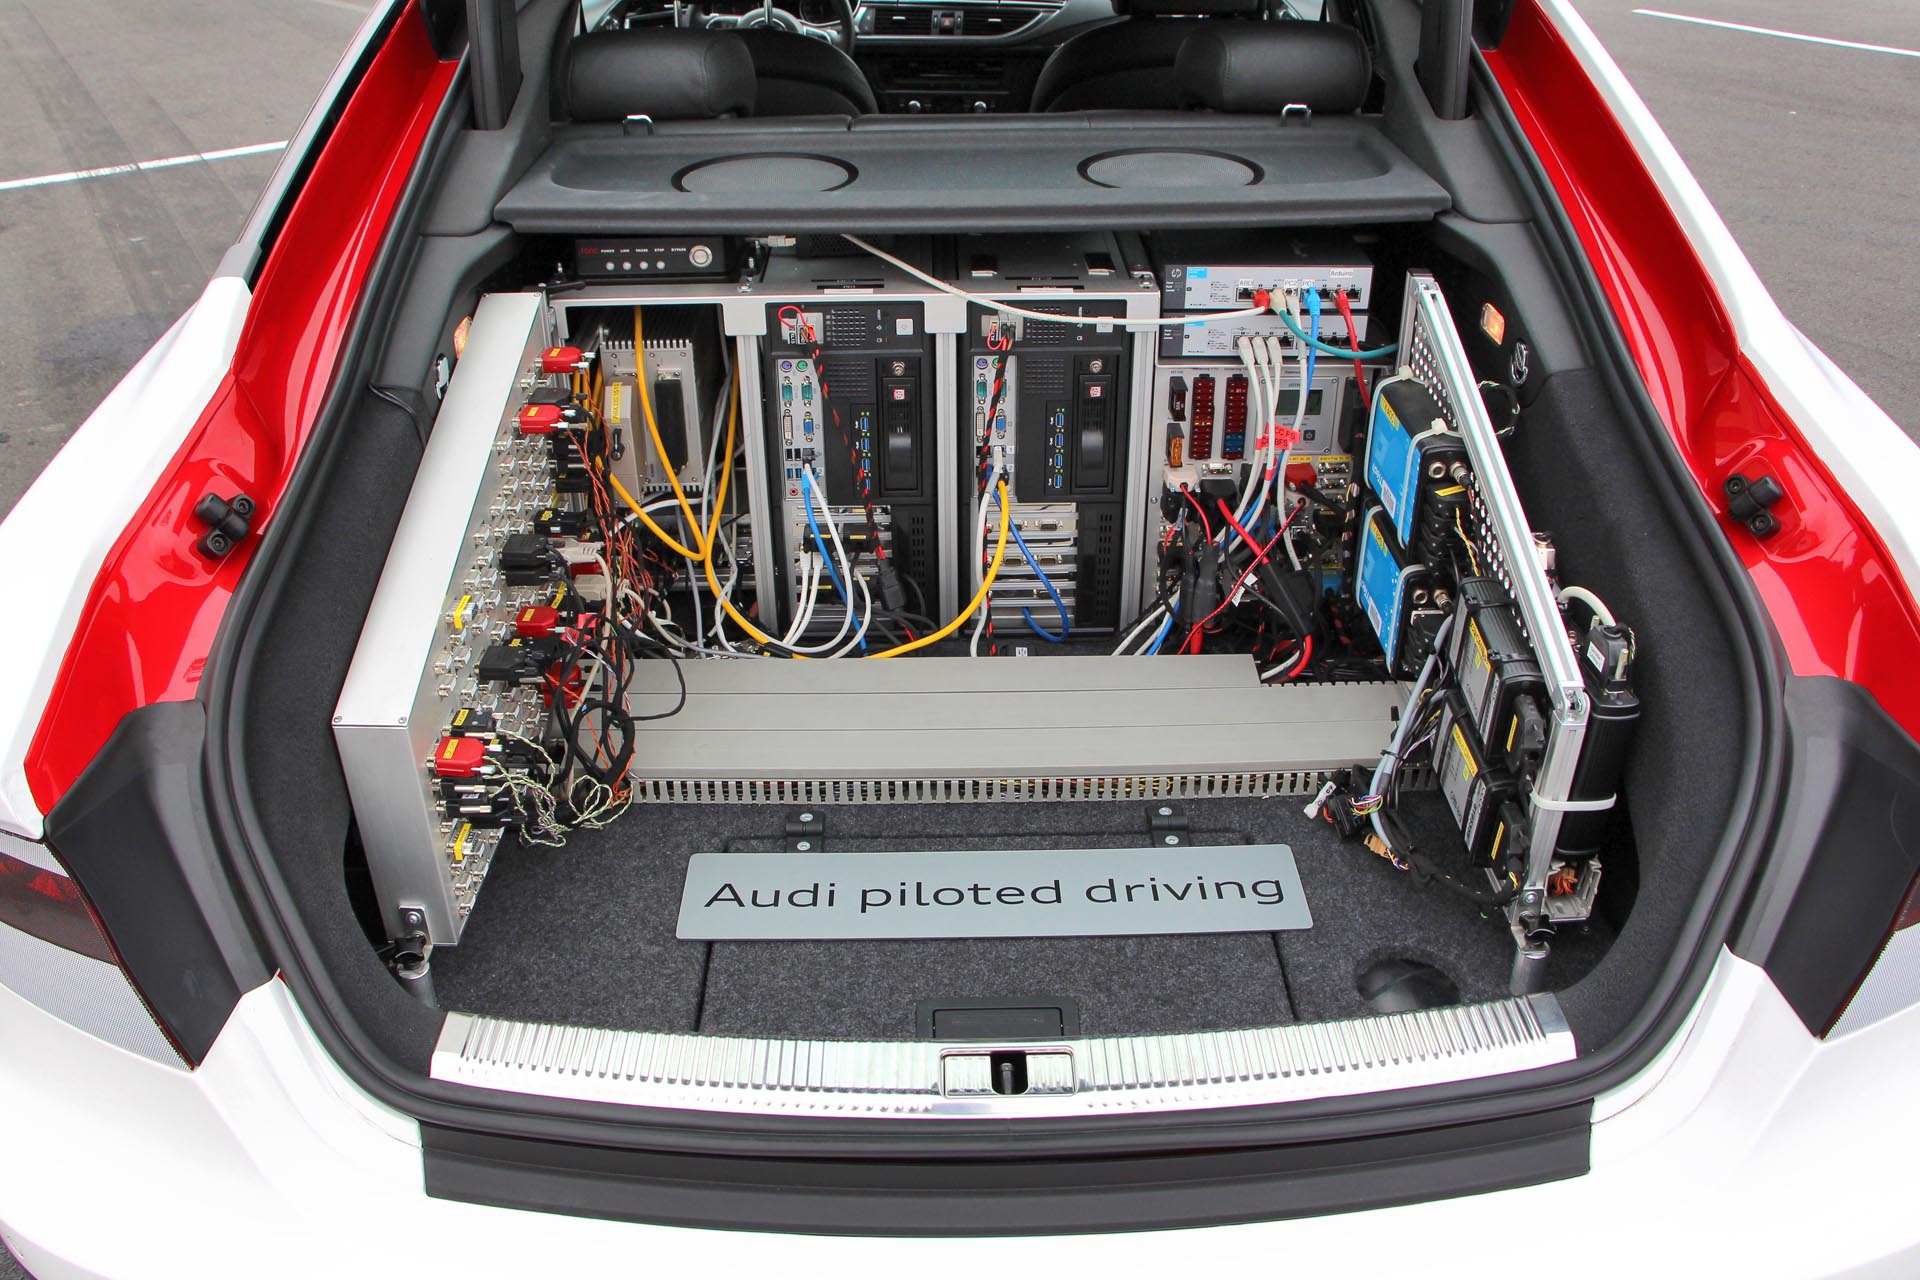 Bobby – control equipment in trunk